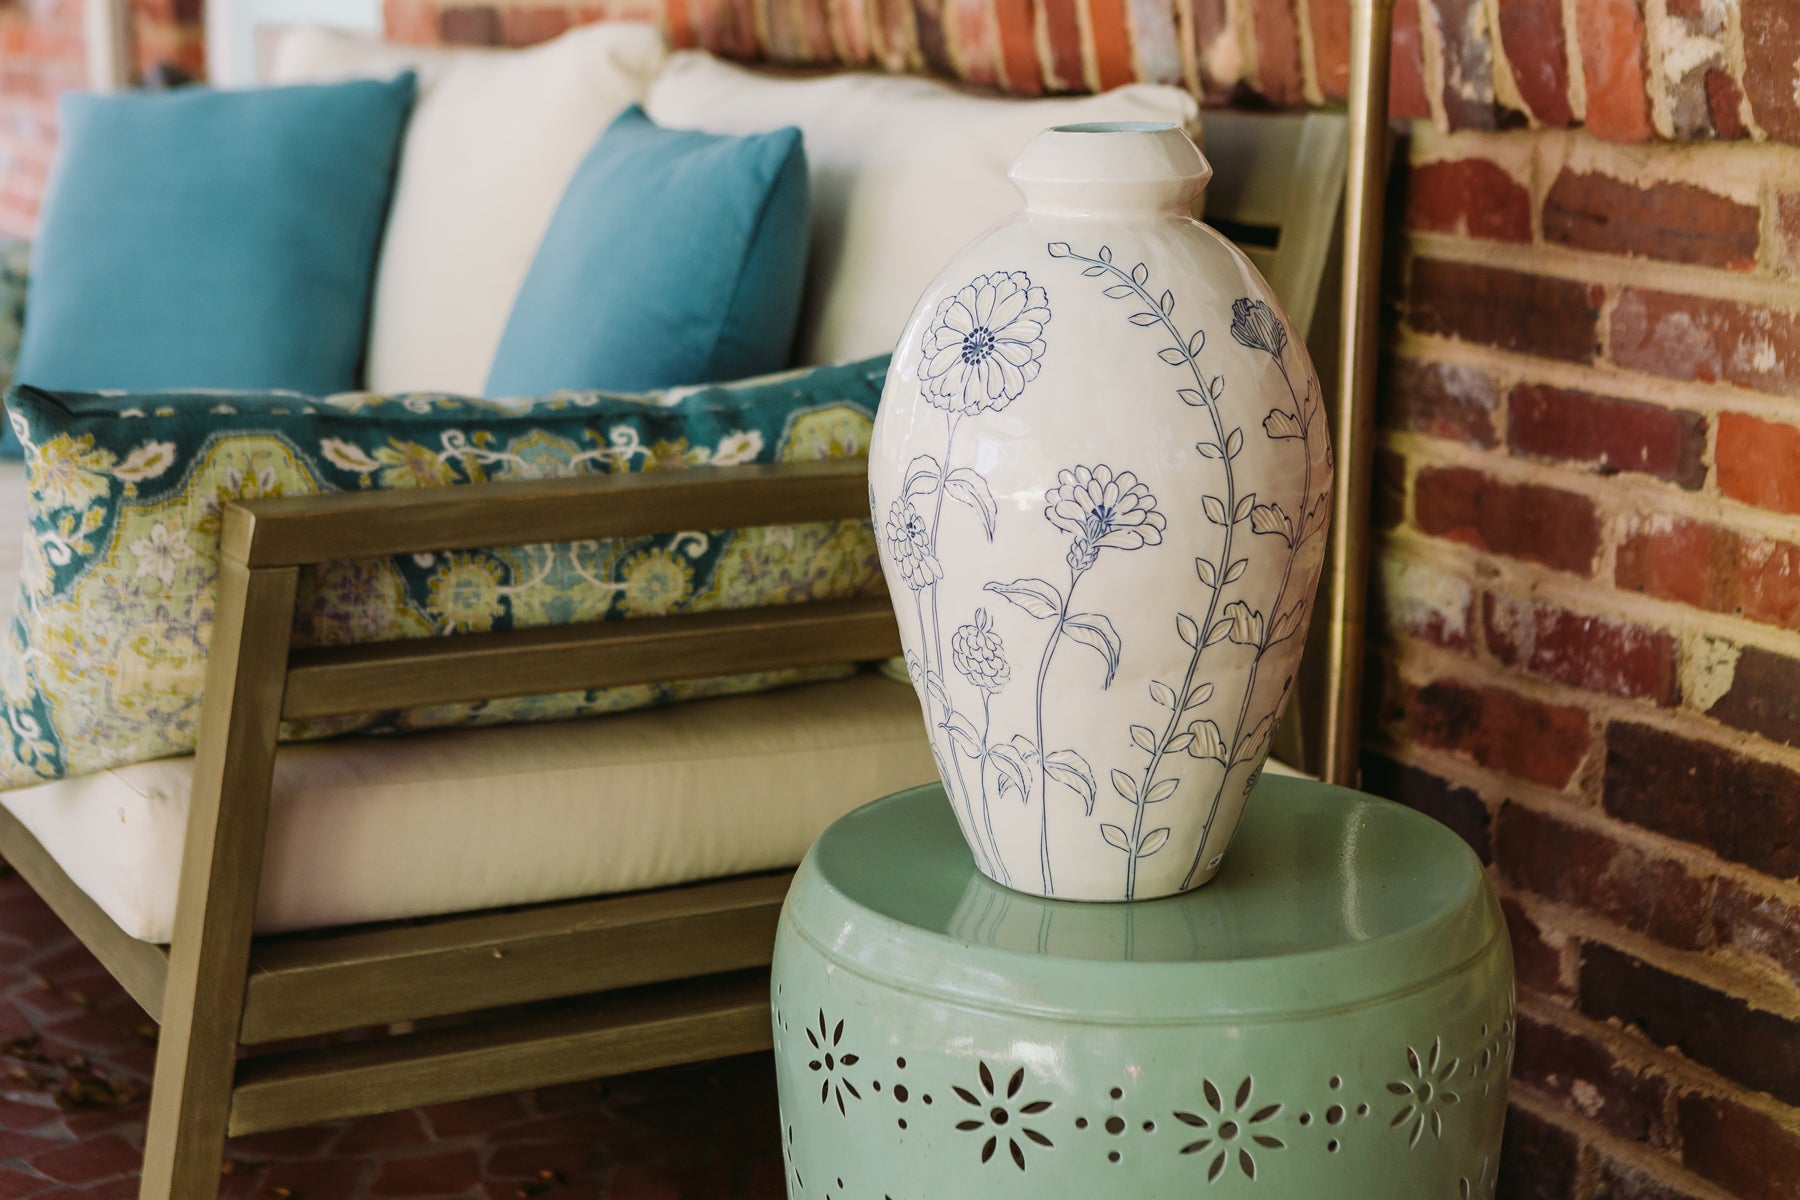 A large handmade porcelain Julie Wiggins vase with cobaly blue floral inlay patterning against an outdoor sitting area background